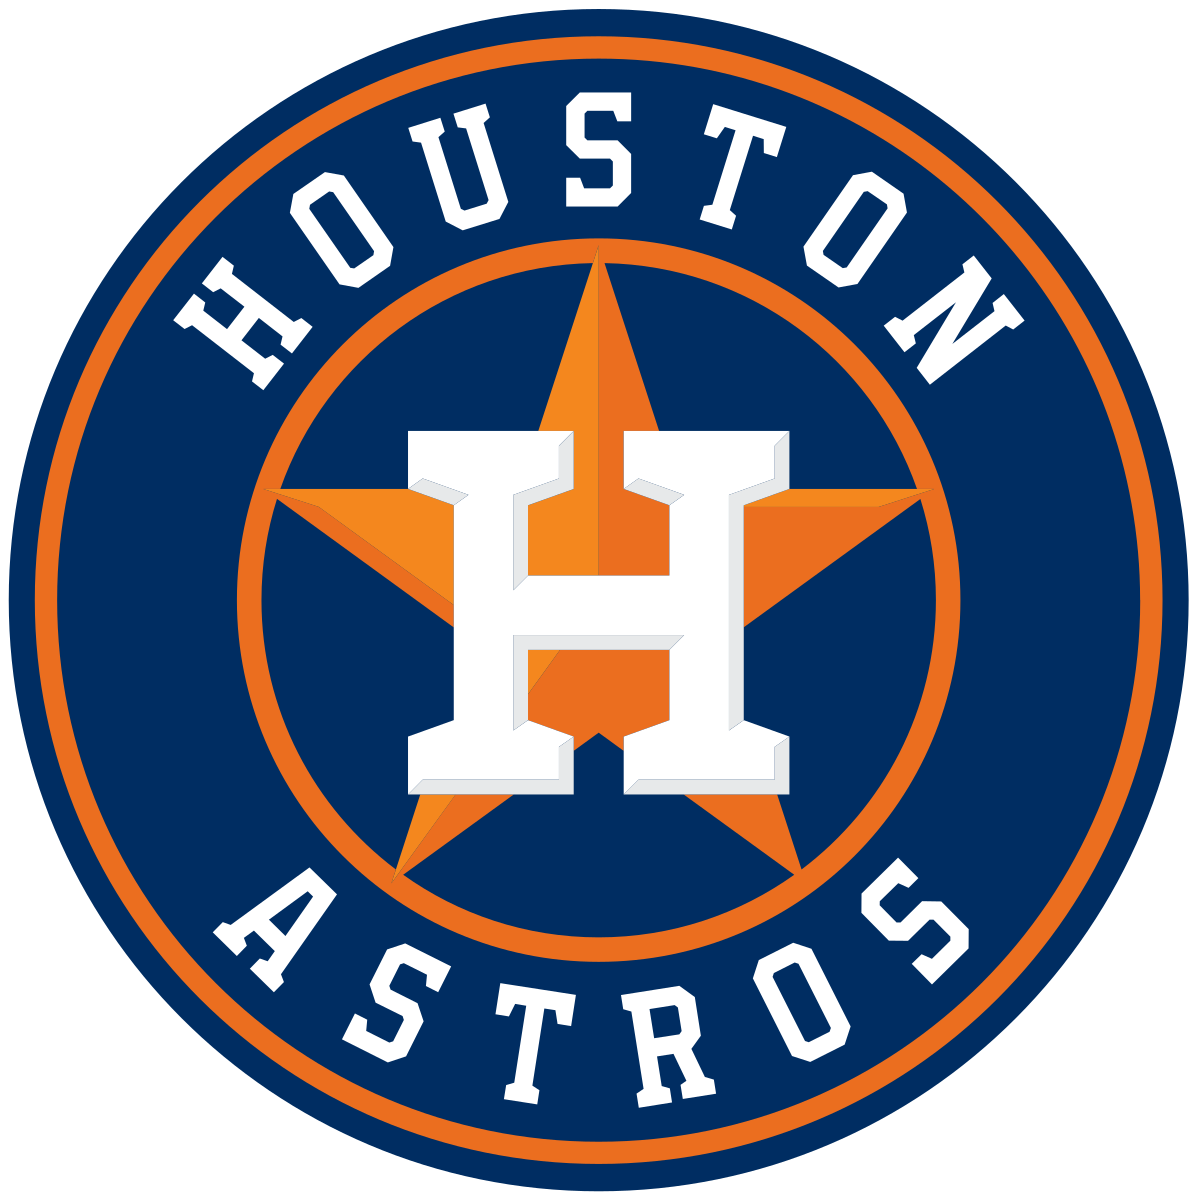 astros roster 2021